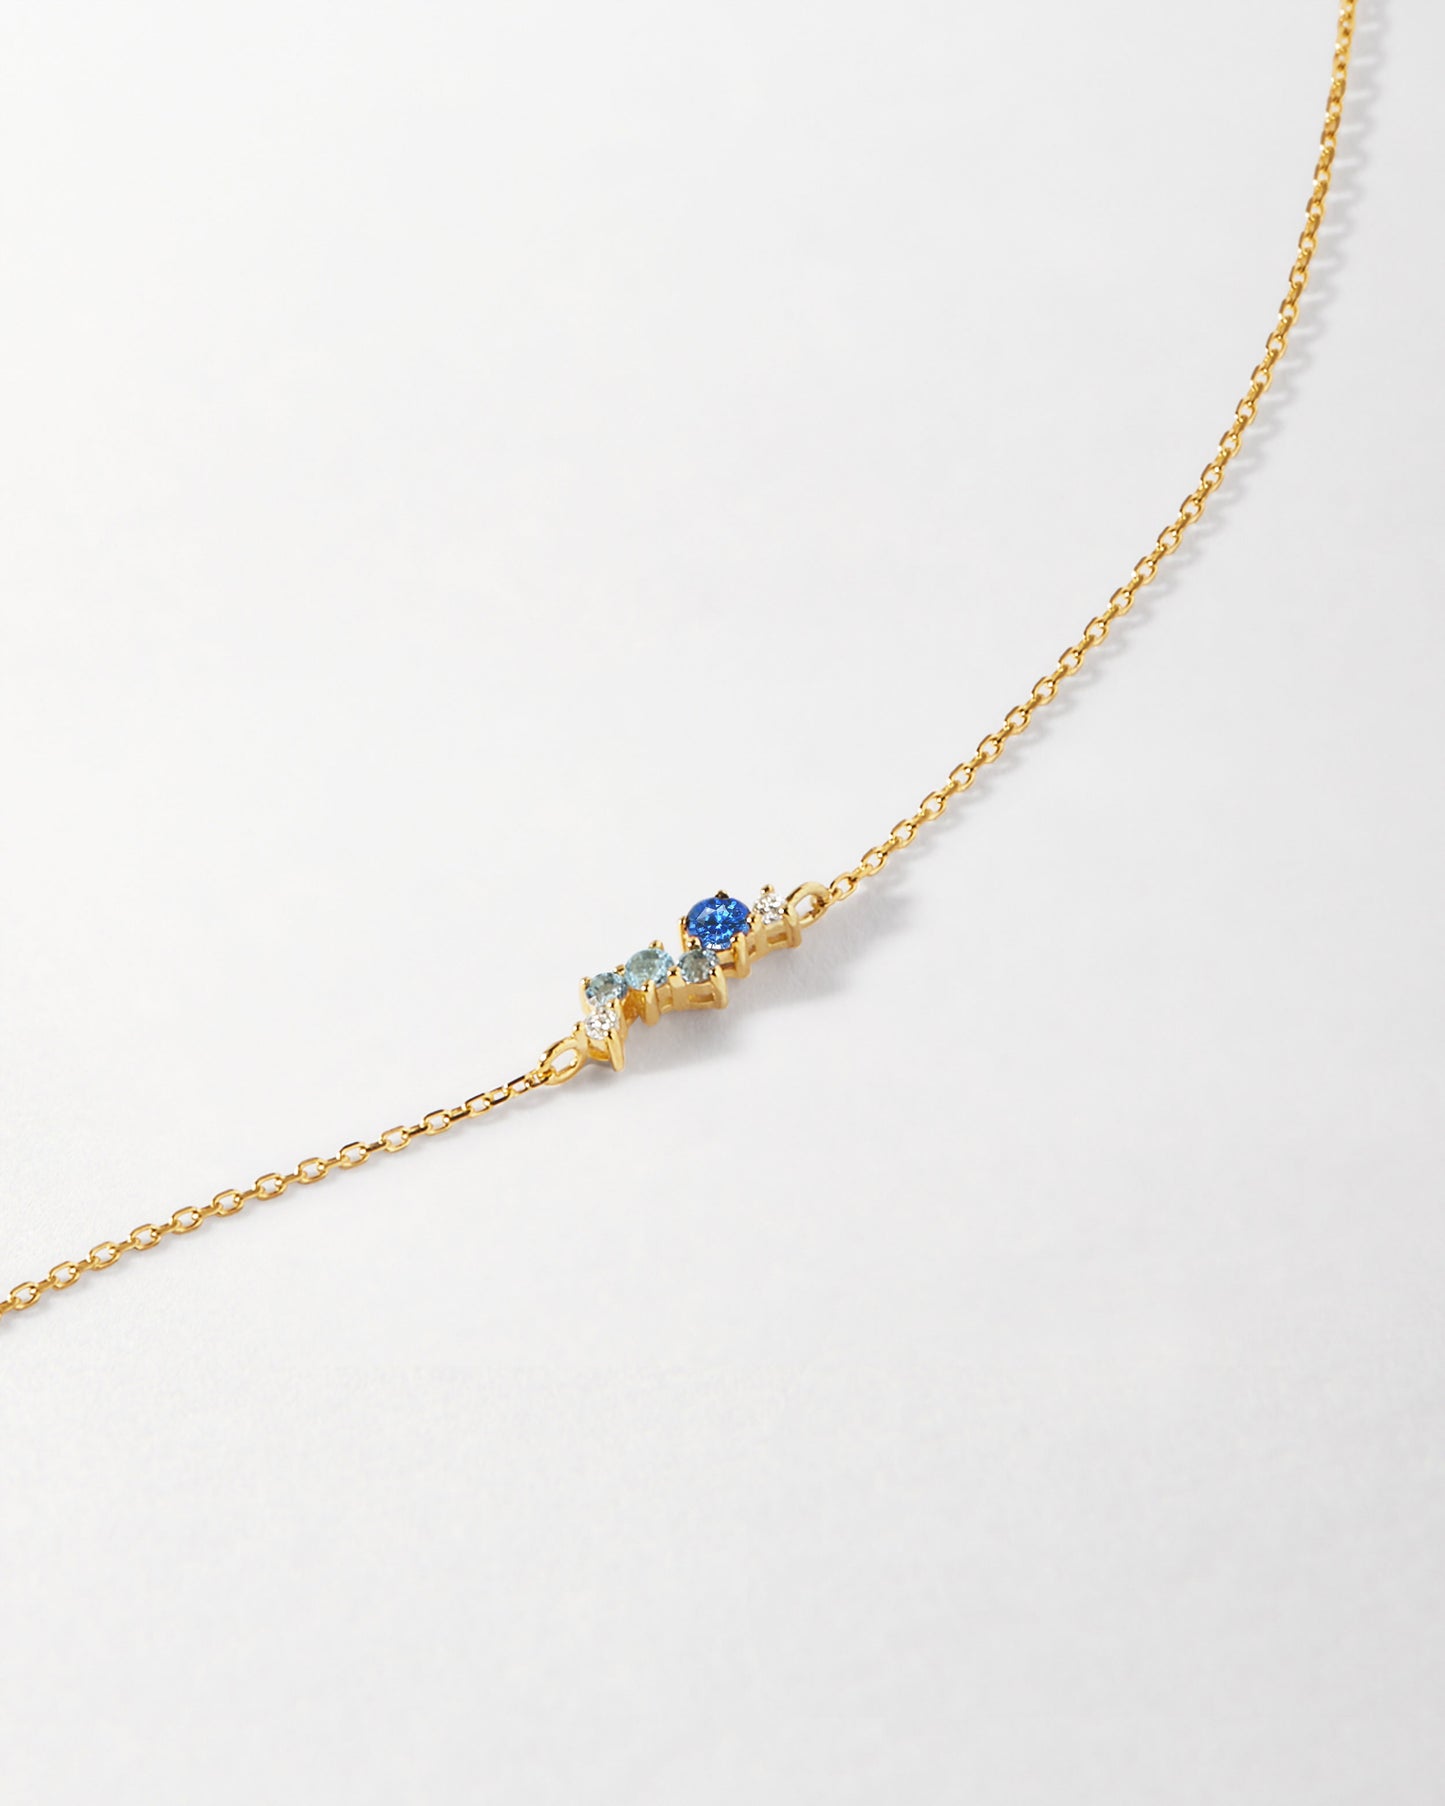 Intuition Sapphire Ray Bracelet